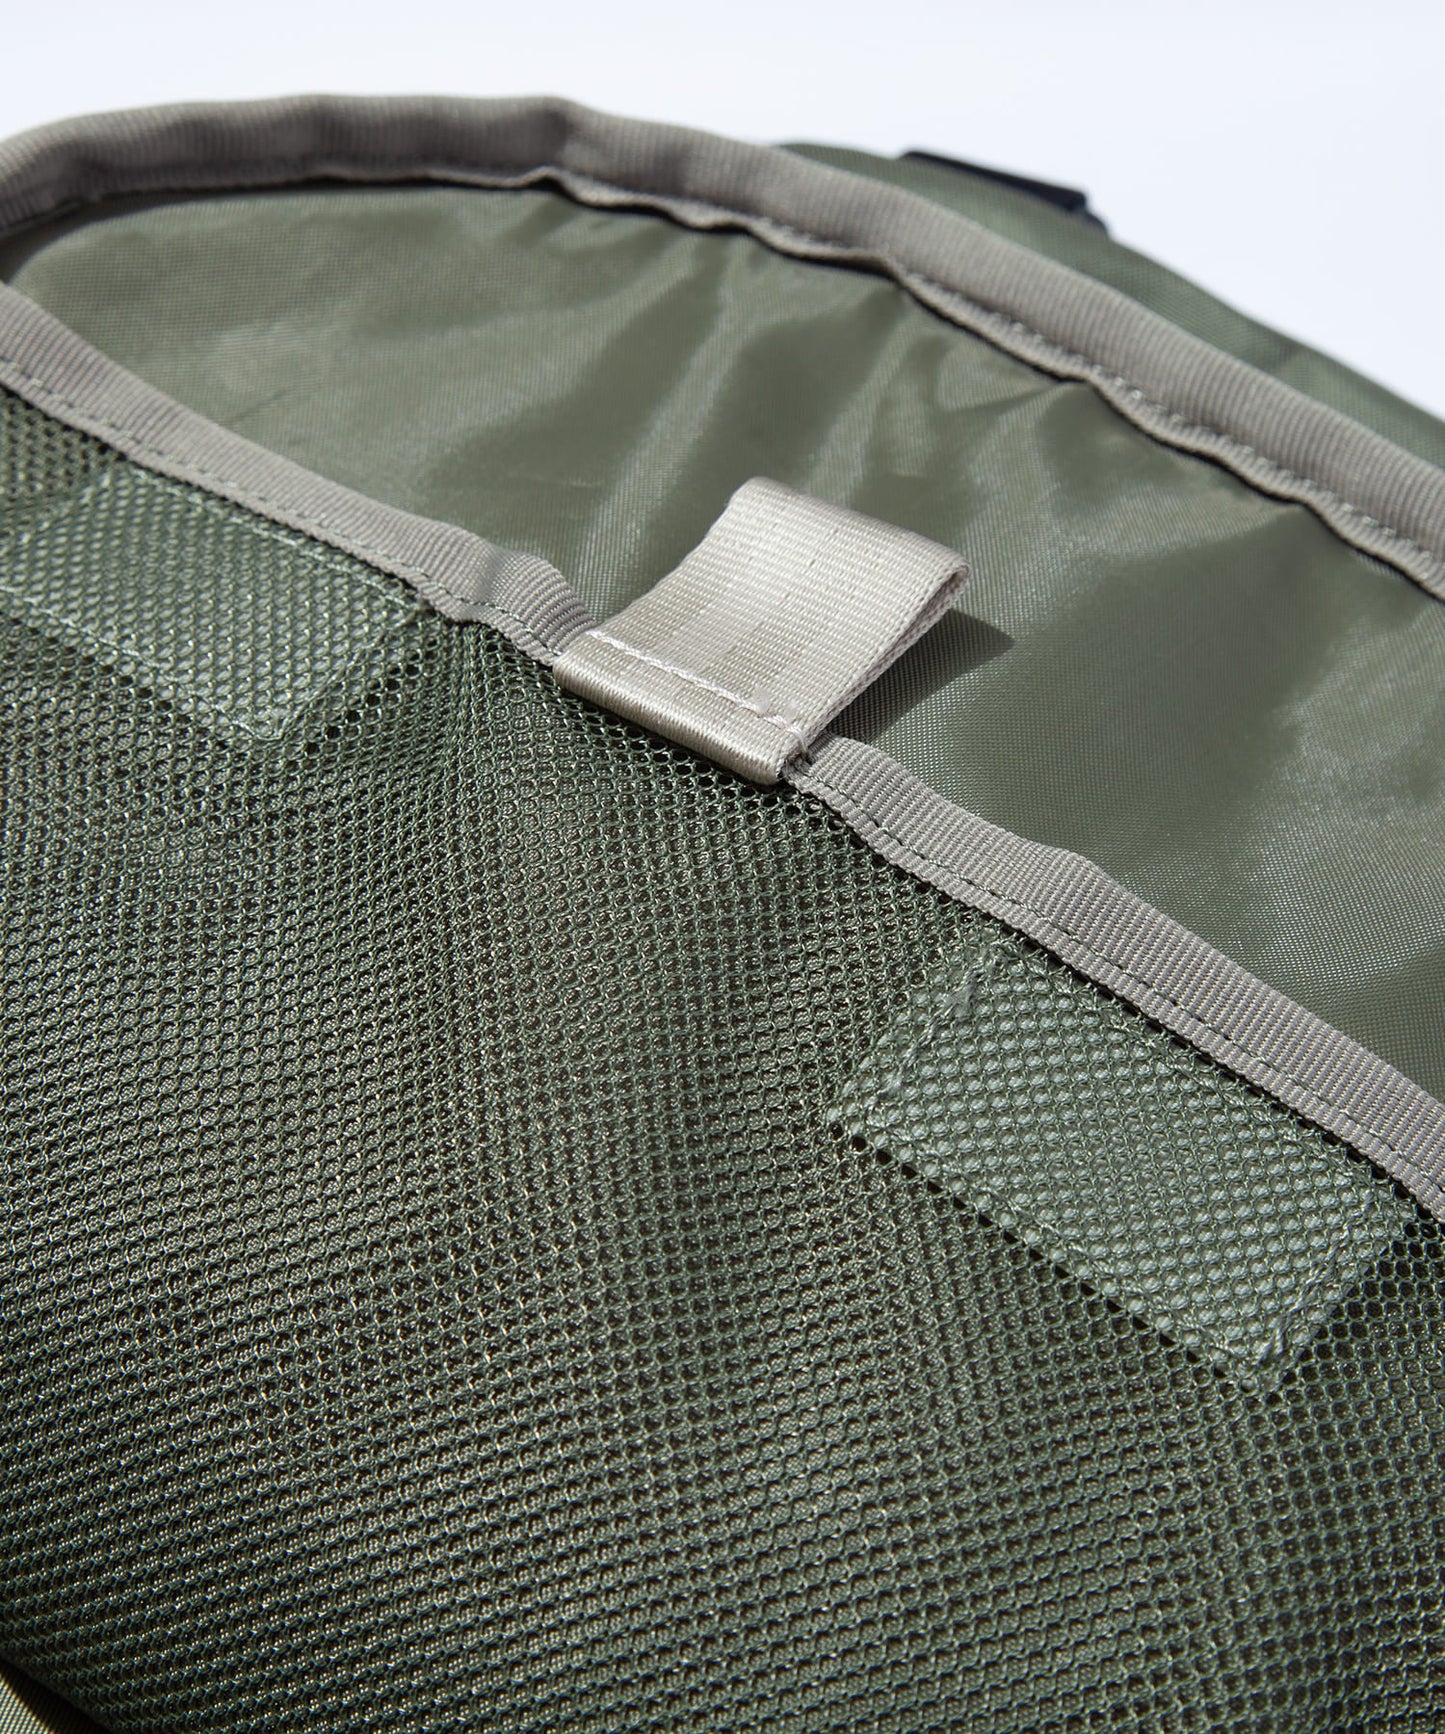 F/CE. ROBIC DAYTRIP BACKPACK